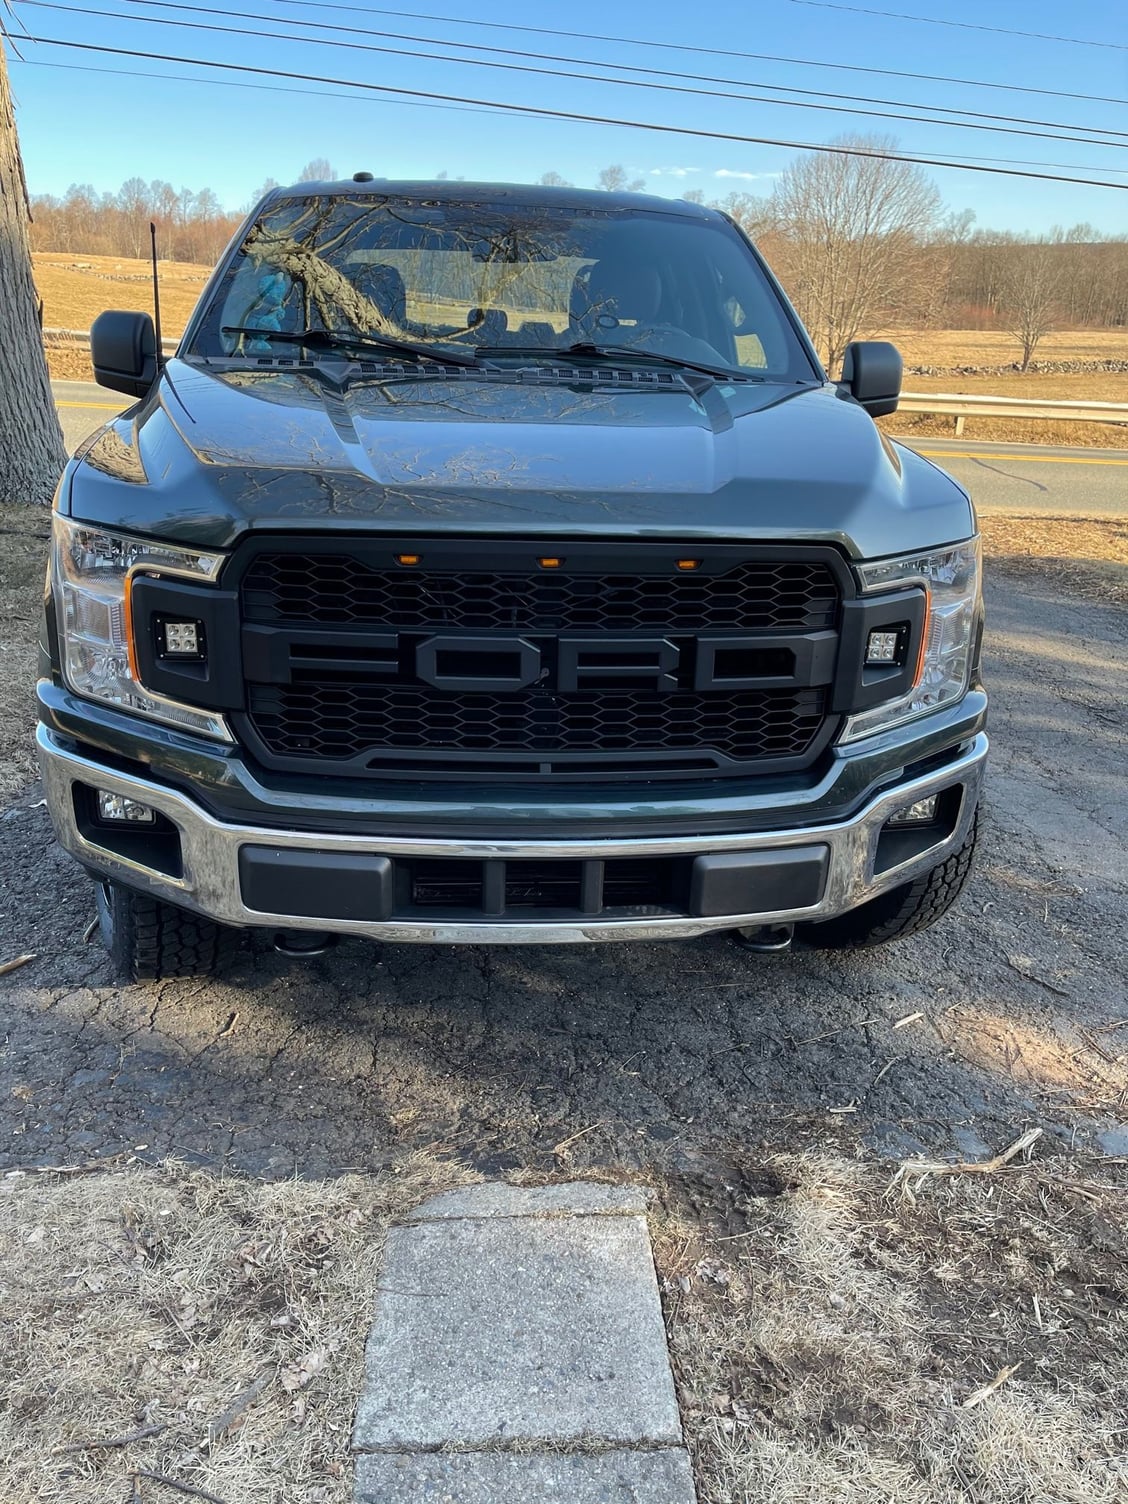 Just Finished some Mods - Ford F150 Forum - Community of Ford Truck Fans